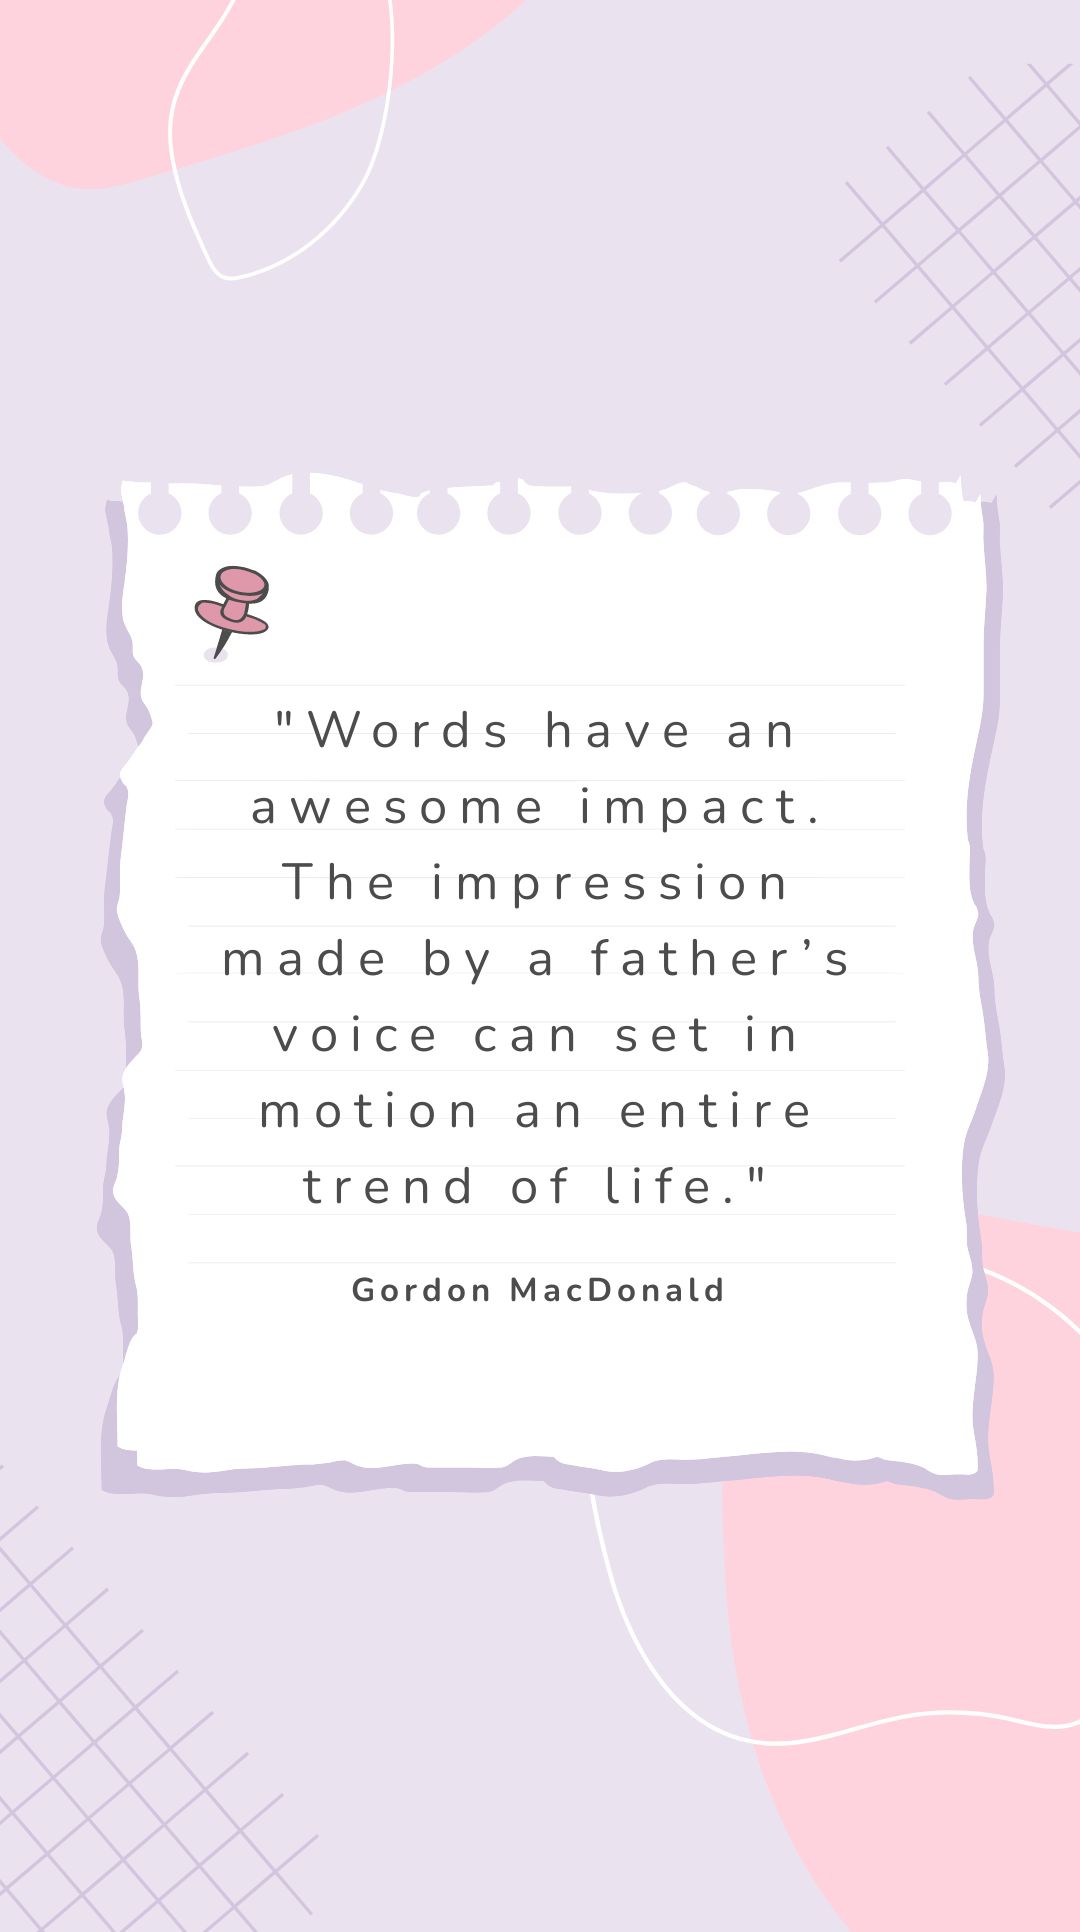 Free Gordon MacDonald - "Words have an awesome impact. The impression made by a father’s voice can set in motion an entire trend of life." in JPG